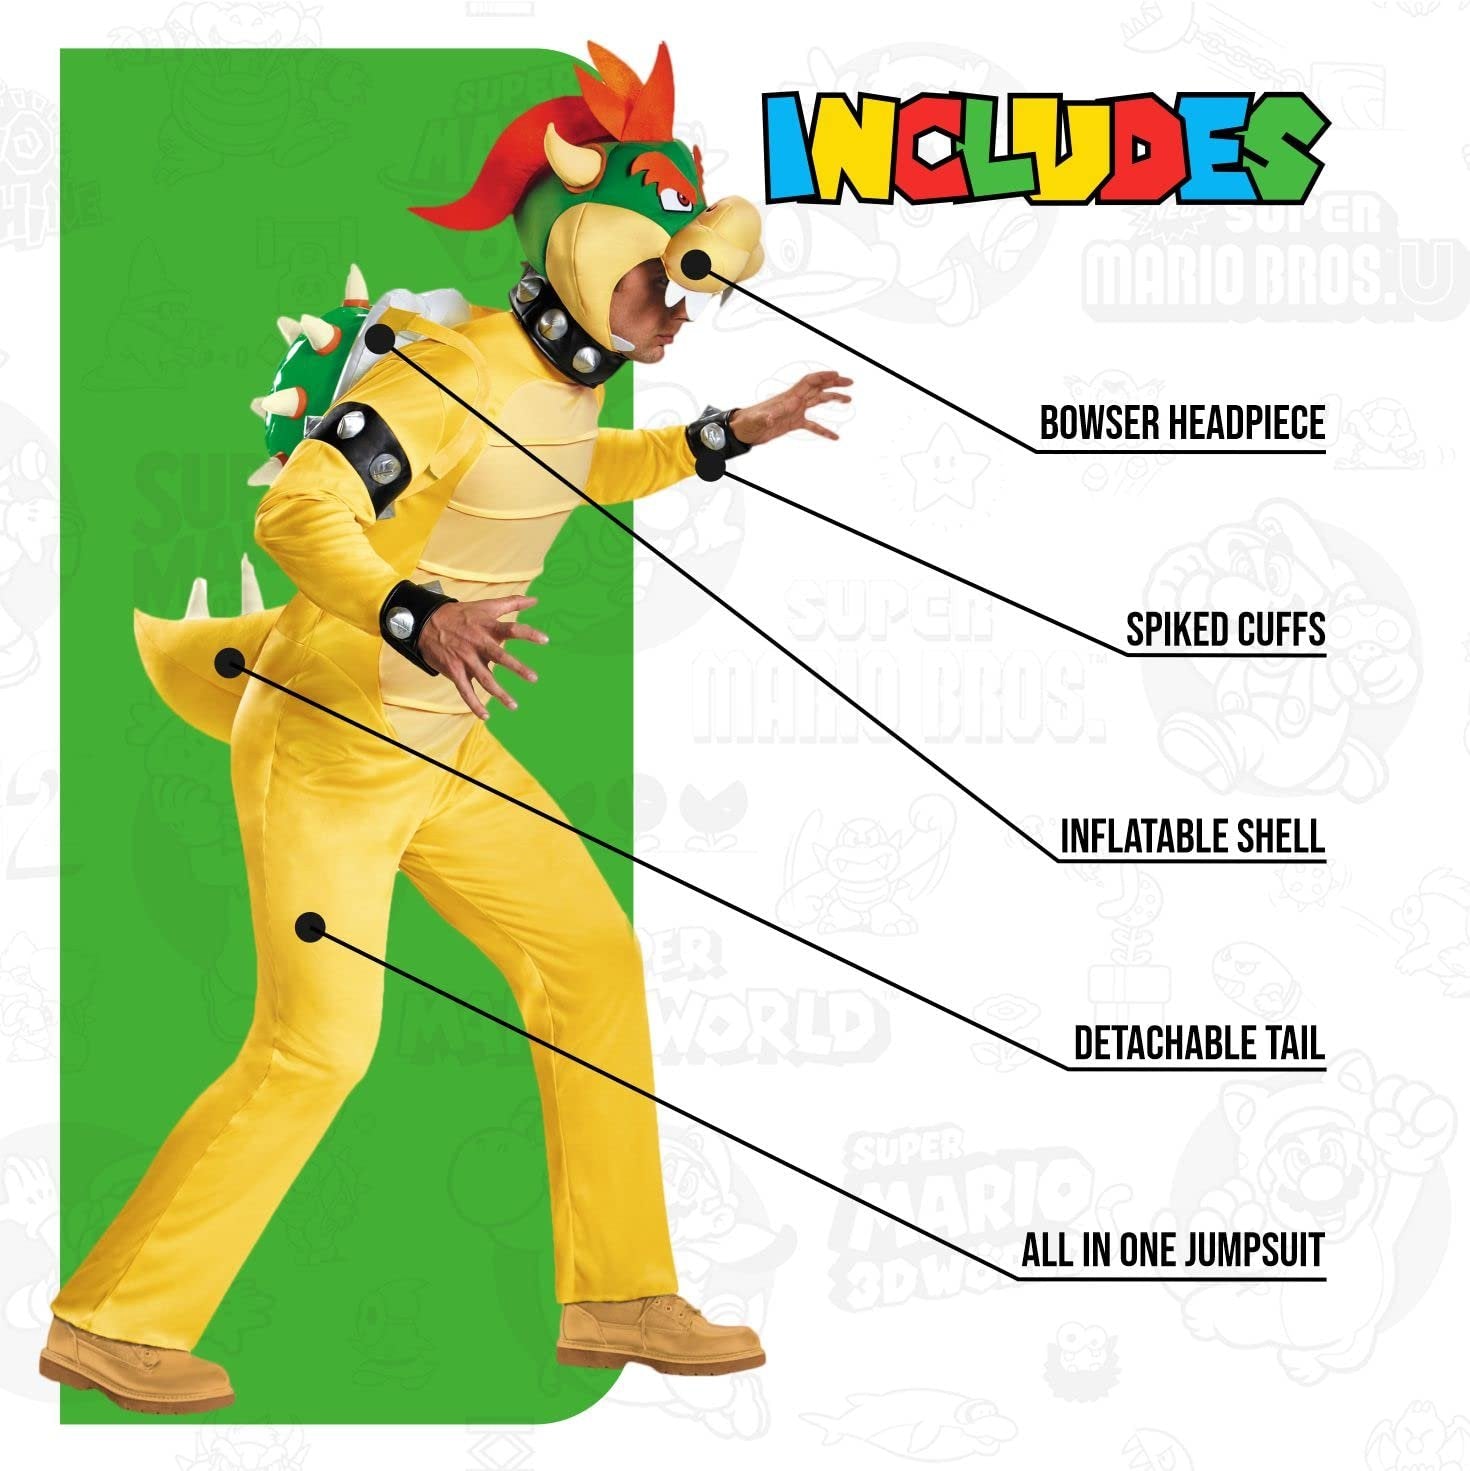 Deluxe Bowser Adult Costume - X-Large